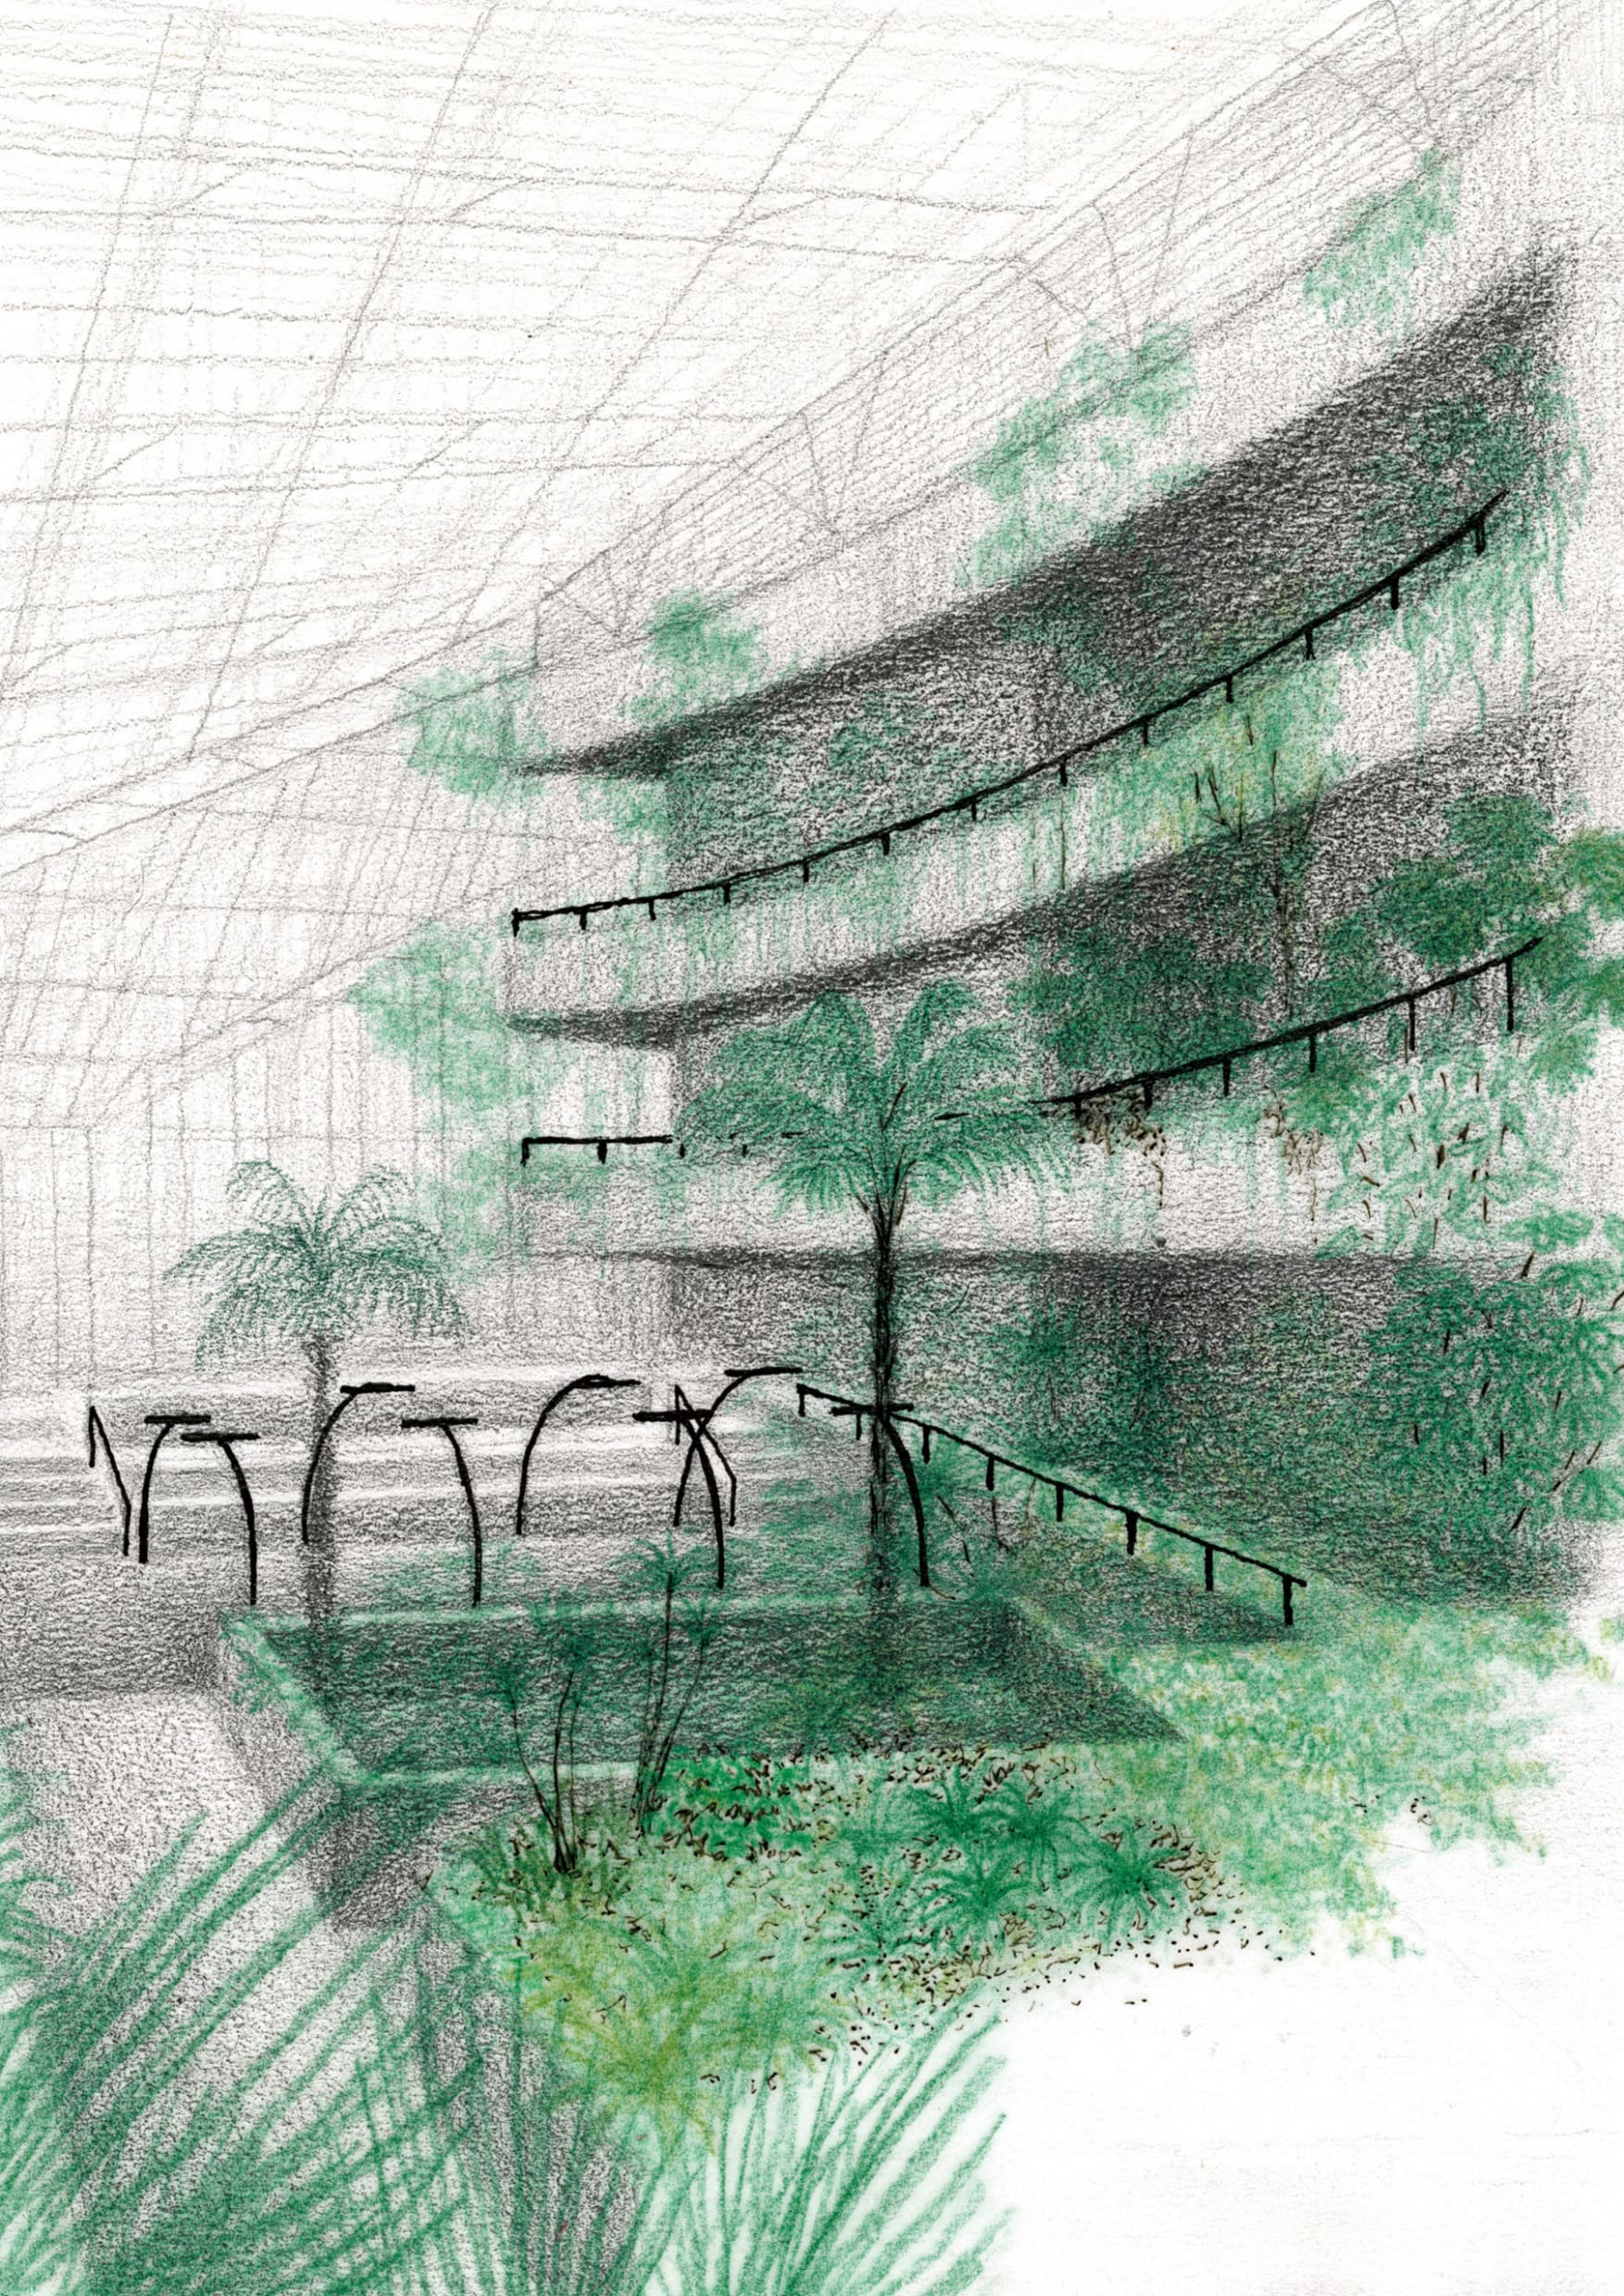 A drawing shows the Barbican botanic garden.